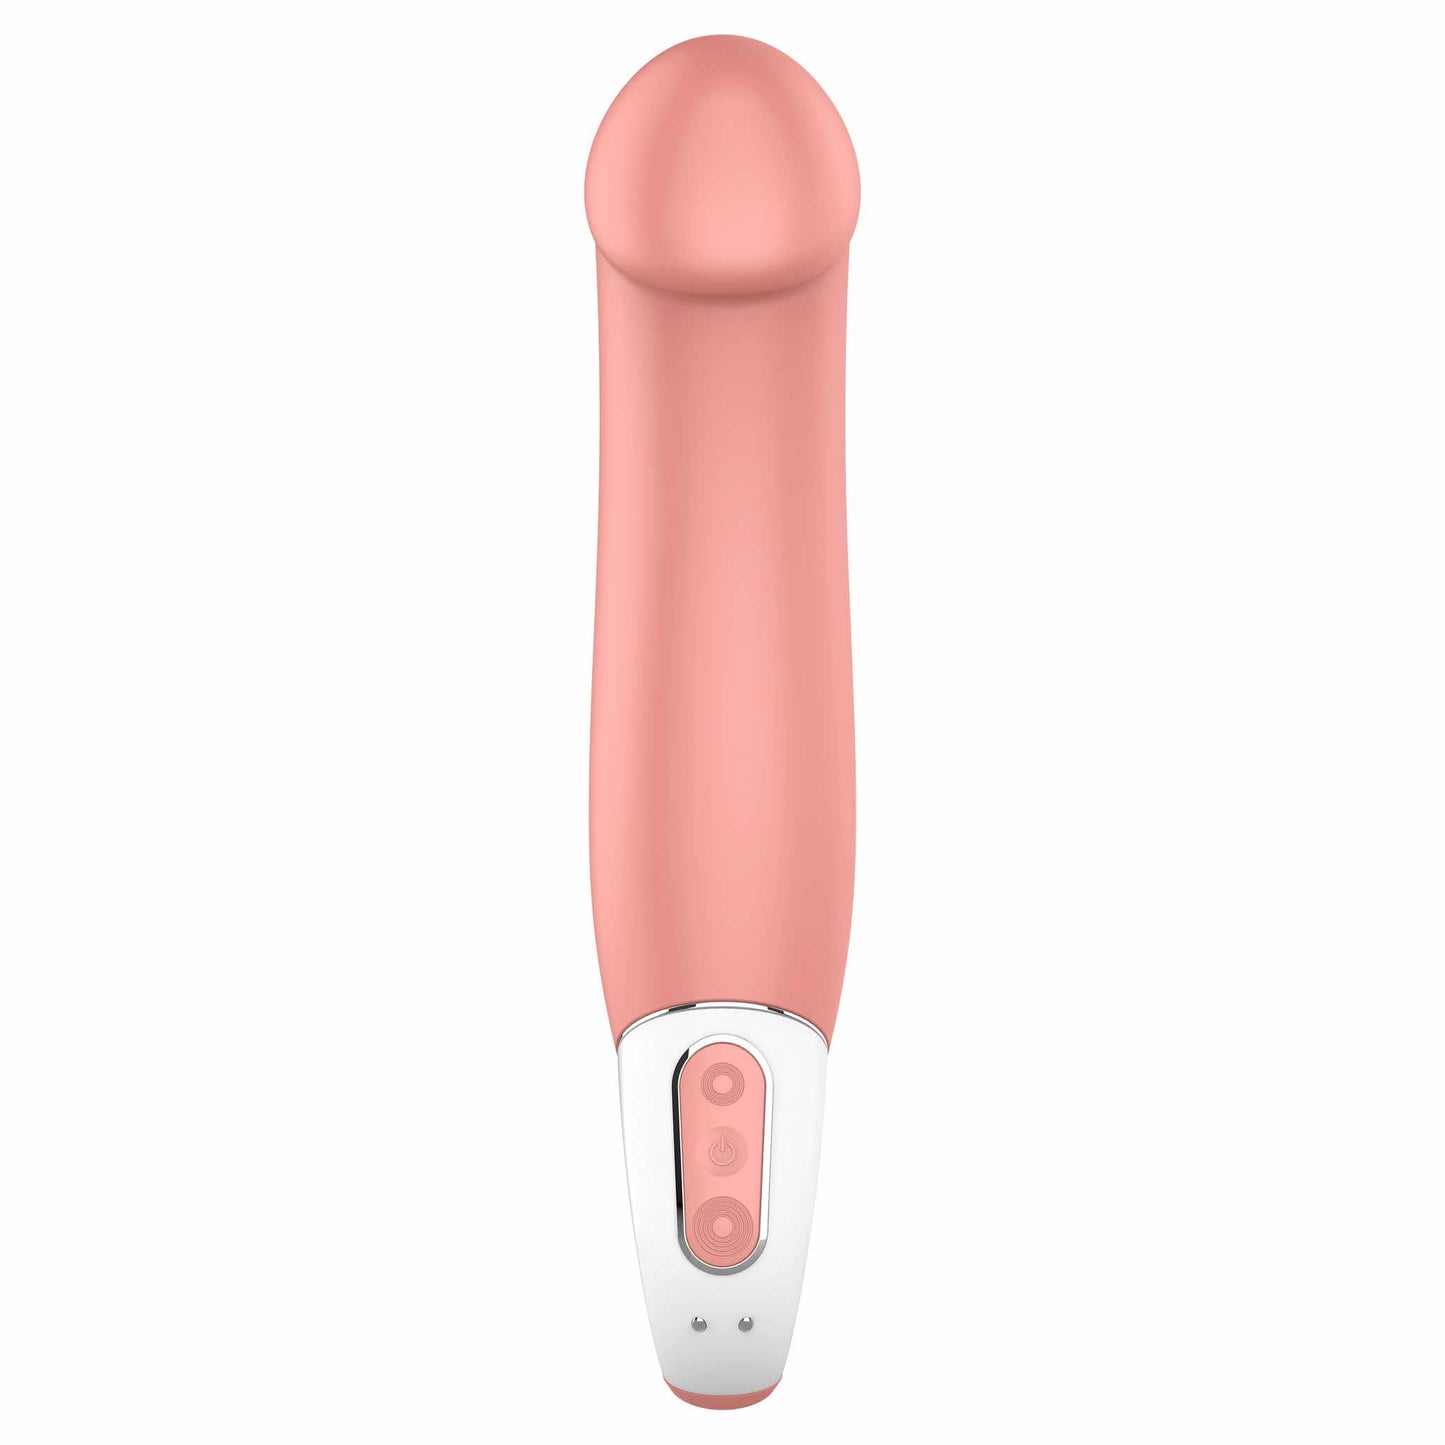 front view of the satisfyer master large vibrating dildo eis029 natural